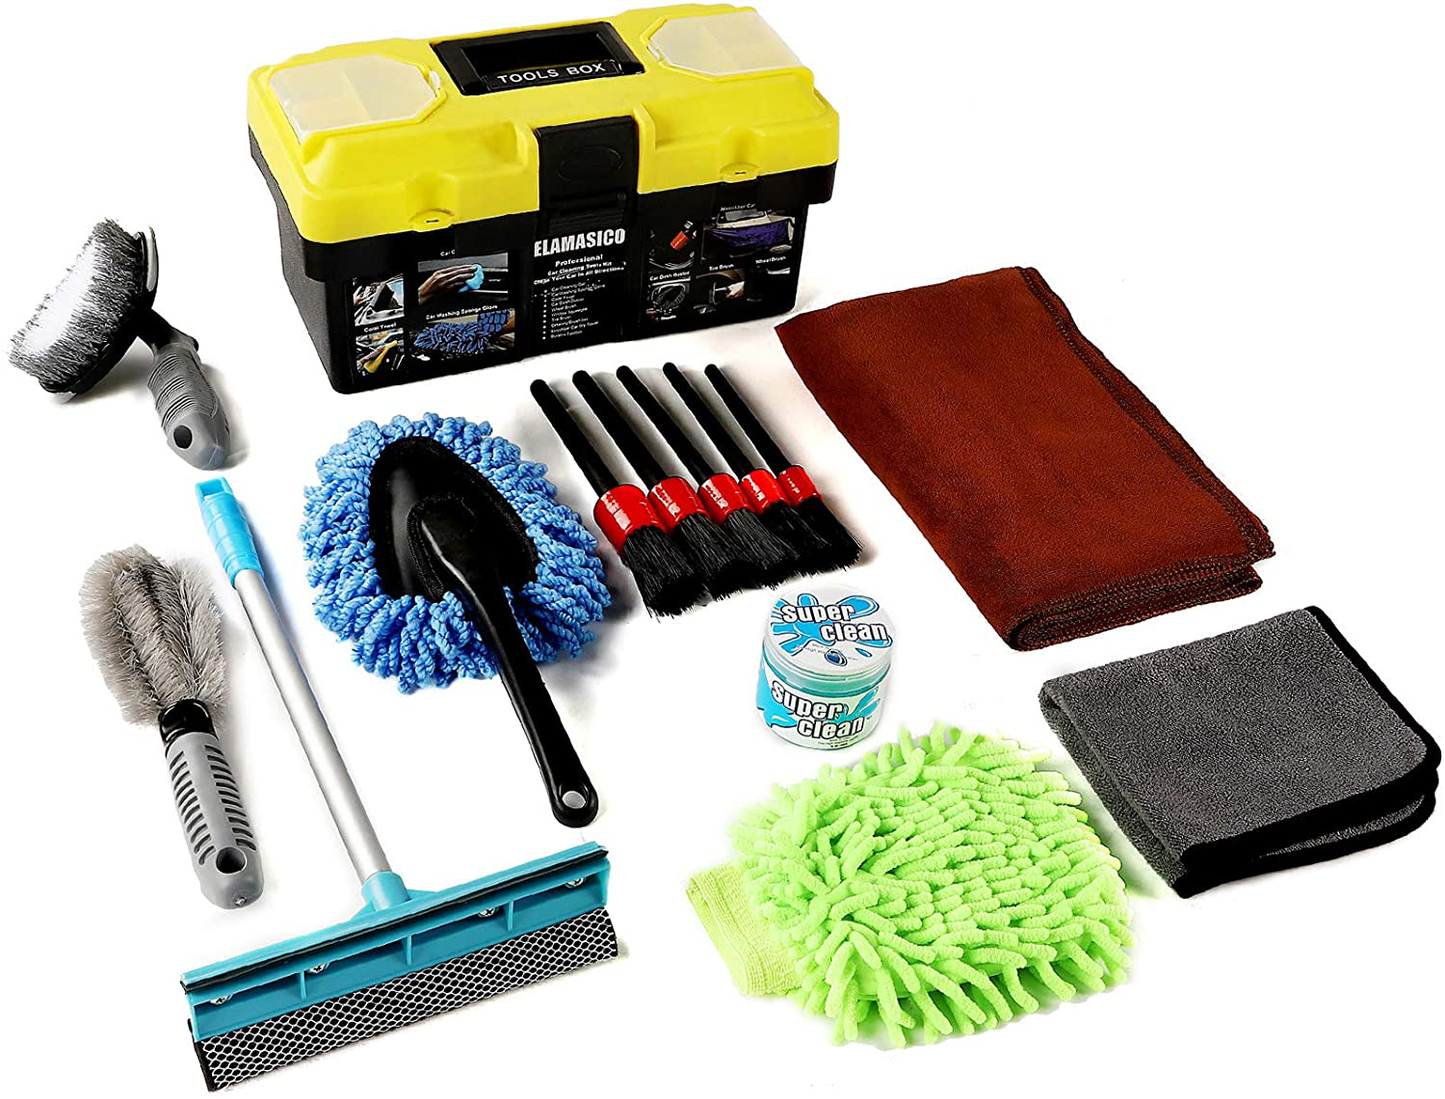 ELAMASICO Car Wash Kit with Box,Interior Car Detailing Kit,Car Detailing Tools Cleaning Kit-Detailing Brushes Set,Cleaning Gel,Microfiber Cleaning Cloth,Car Wash Mitt,Duster,Squeegee(14 PCS)